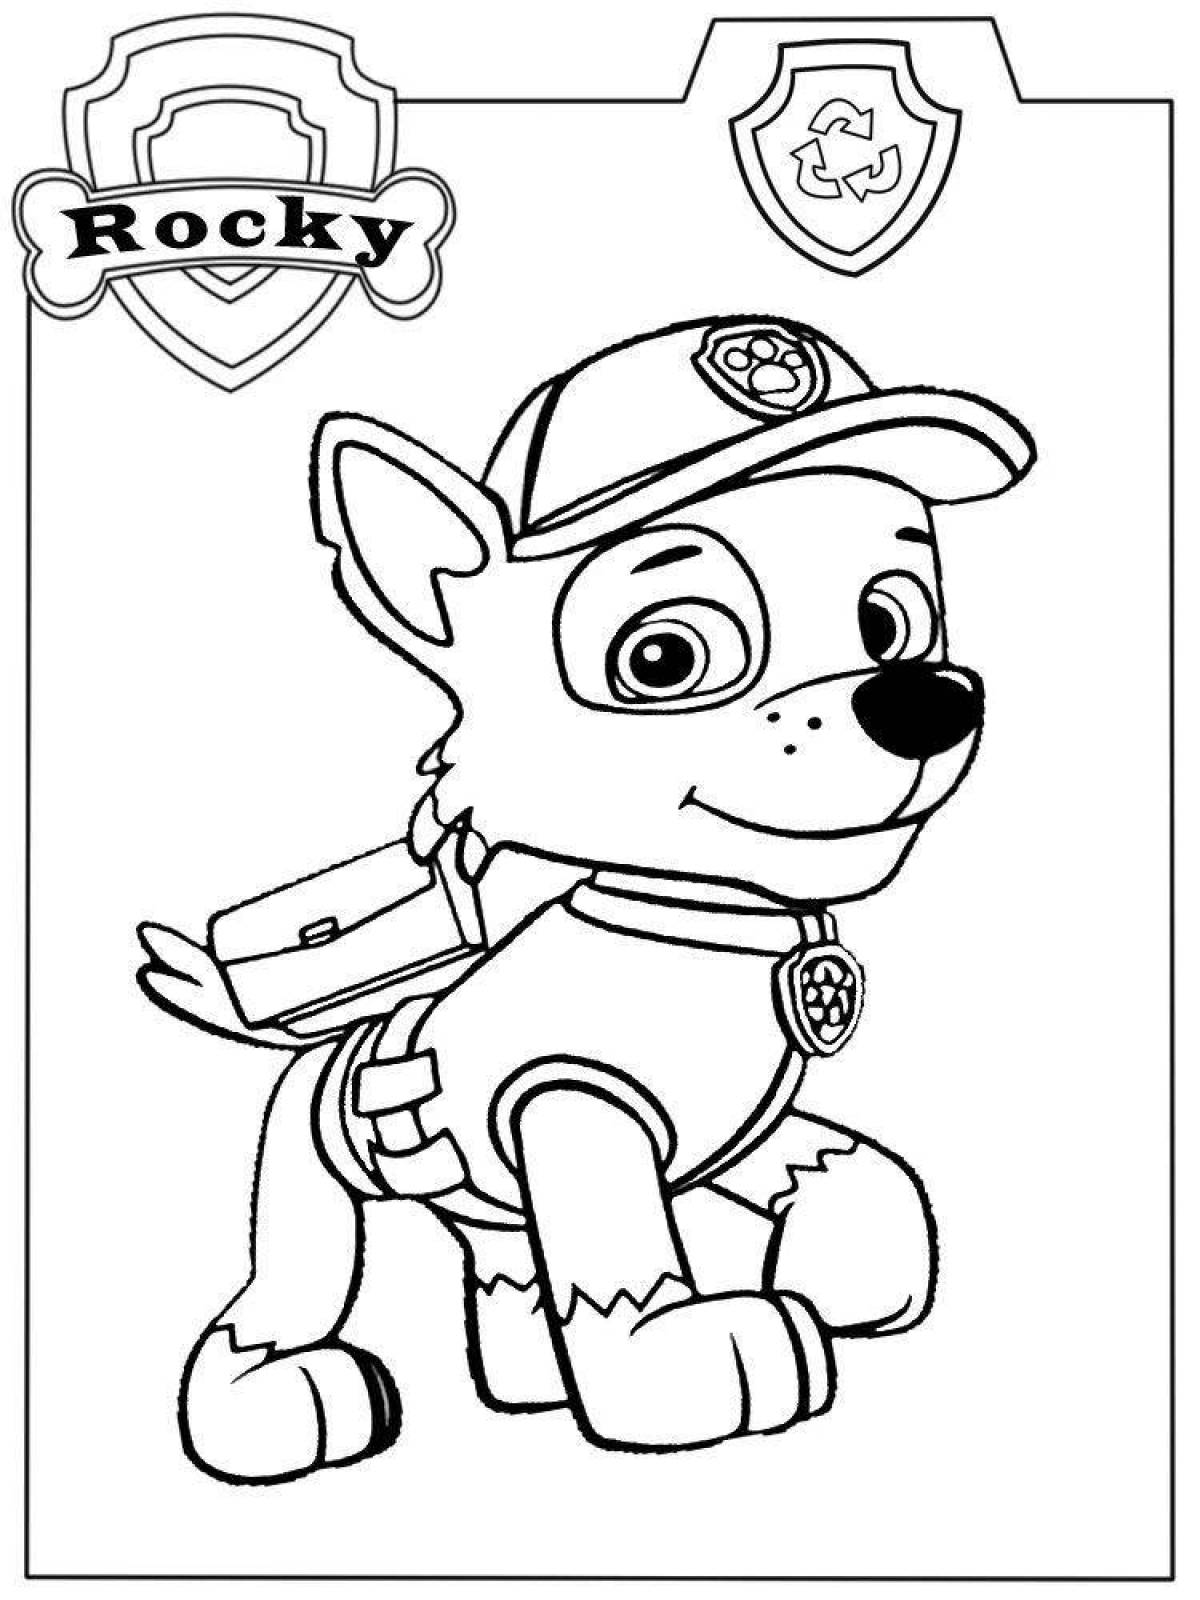 Fabulous rocky coloring book